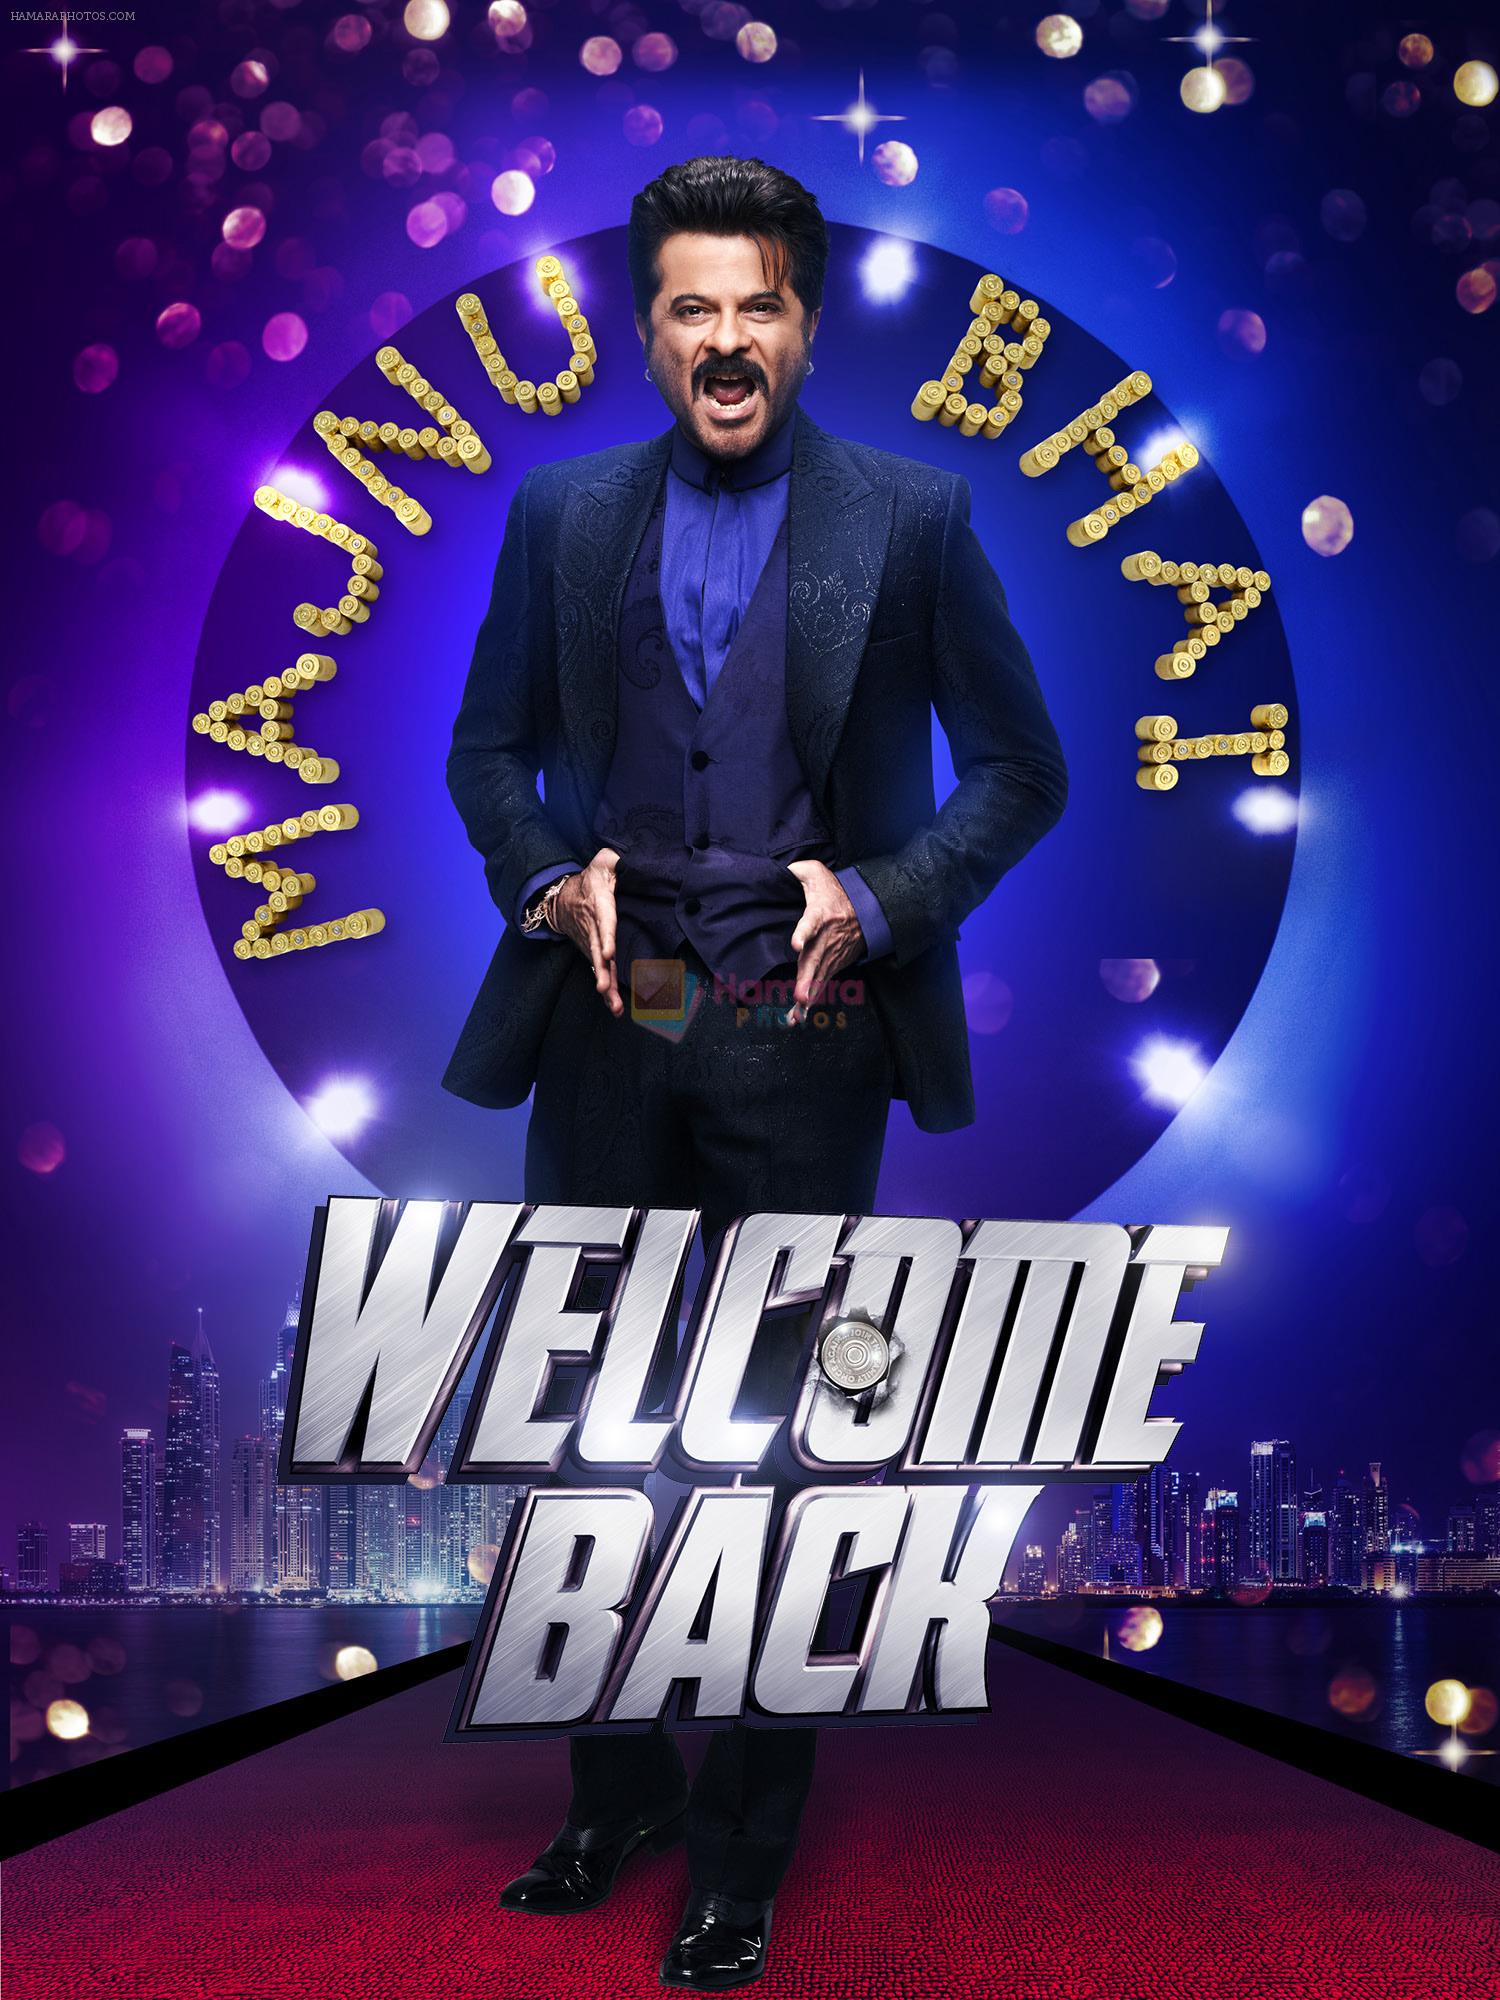 Poster of Welcome Back